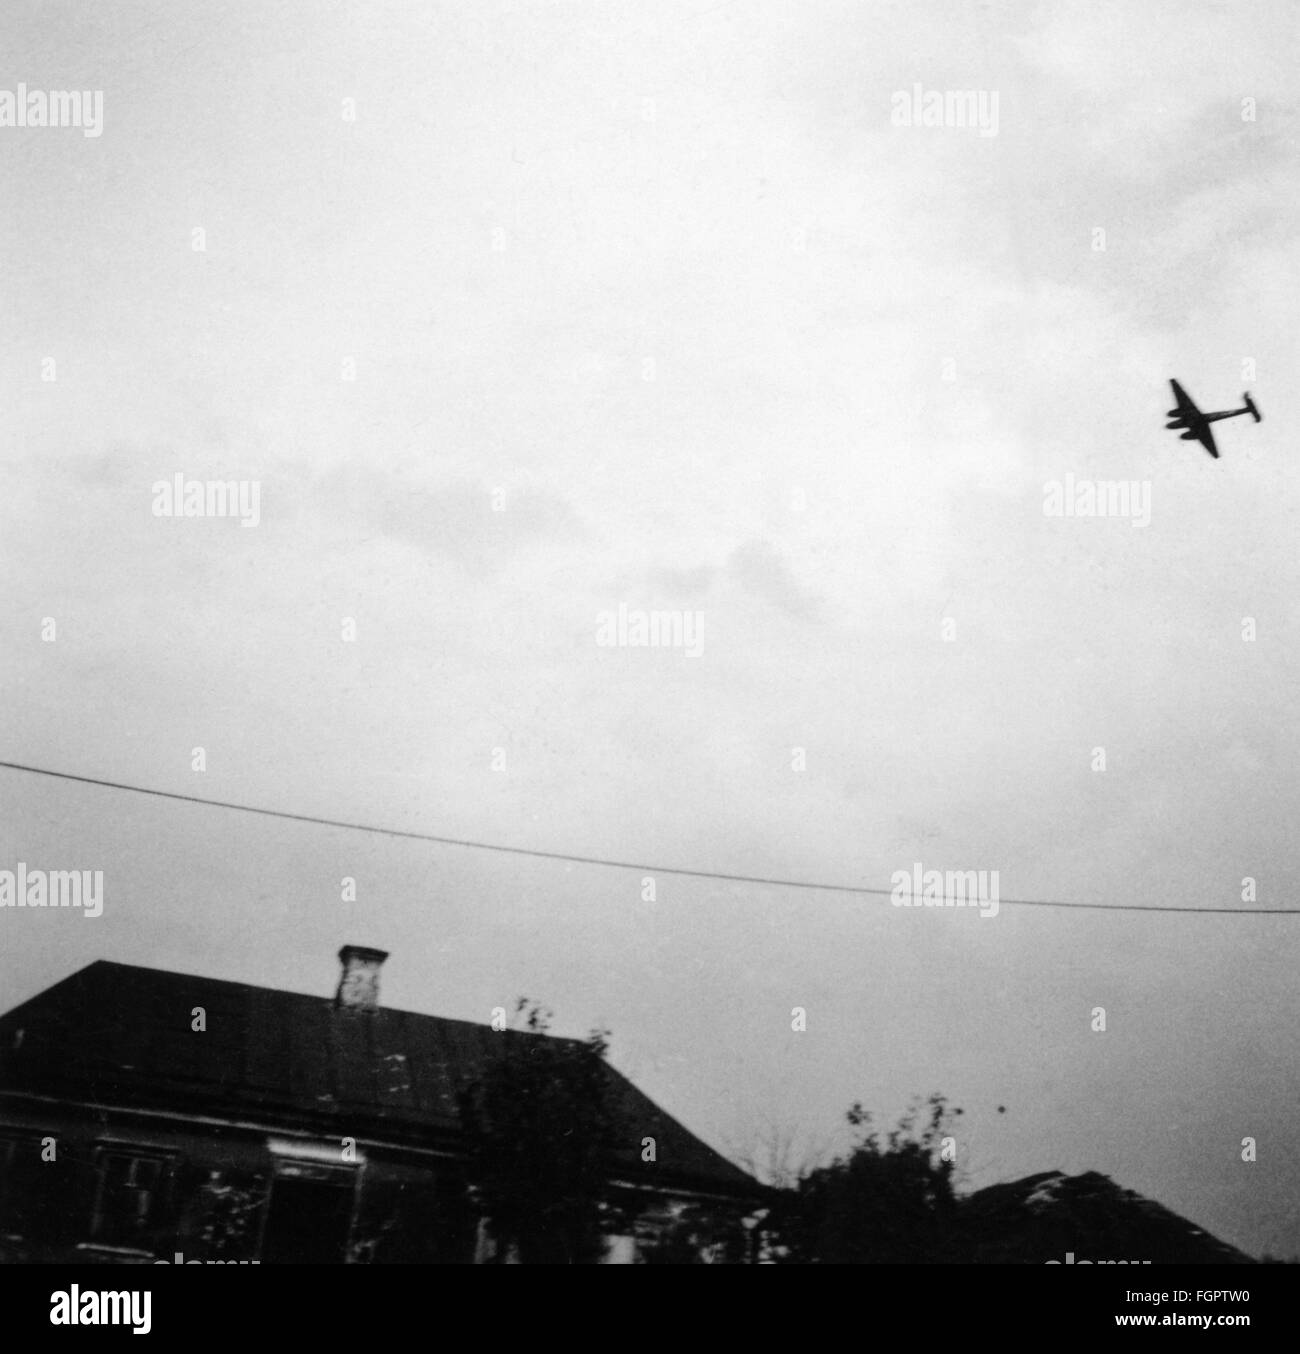 events, Second World War / WWII, aerial warfare, Soviet Union, Operation 'Barbarossa' (German Invasion of the Soviet Union), German heavy fighter Messerschmitt Bf 110 over a village in the Ukraine, 1941, Additional-Rights-Clearences-Not Available Stock Photo